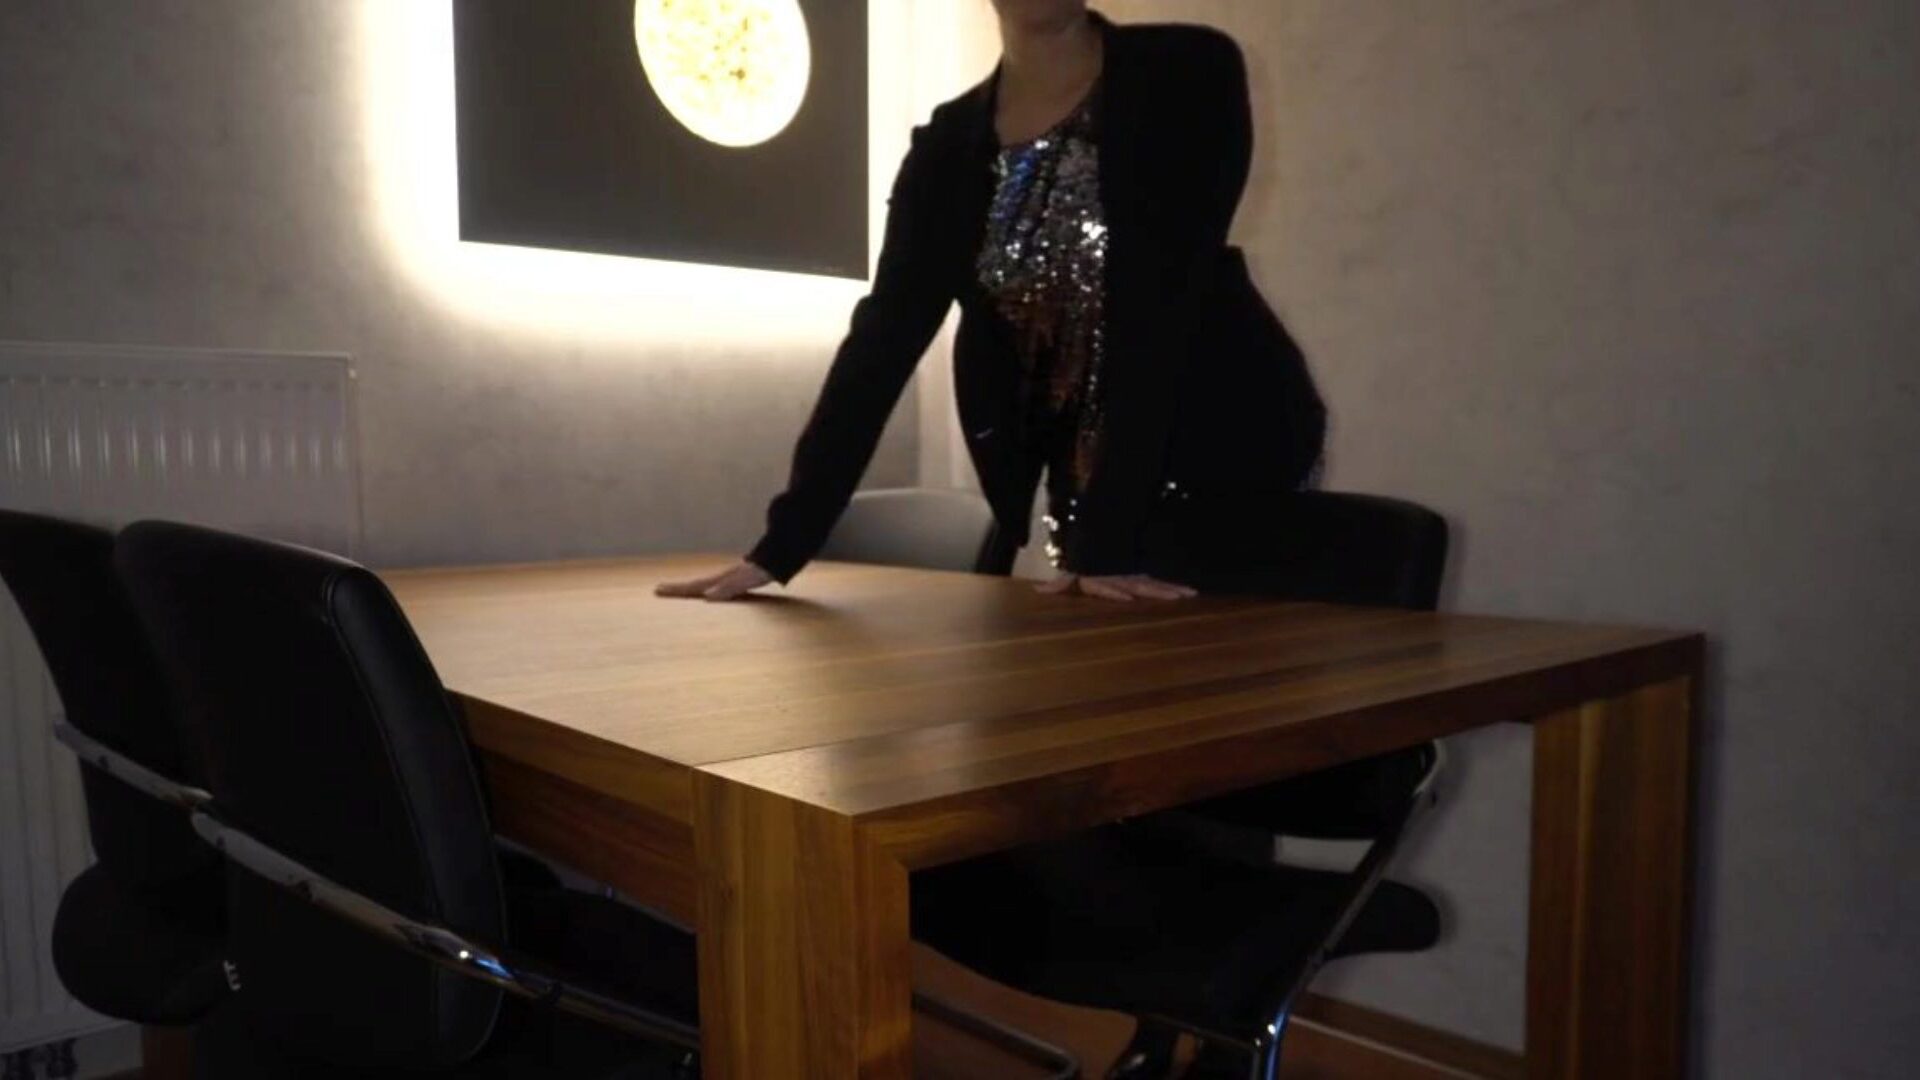 boss fucks secretary anally on the table ... watch boss fucks secretary anally on the table - business-bitch episode on xhamster - the ultimate bevy of free-for-all Milf danez hd porno tube videos